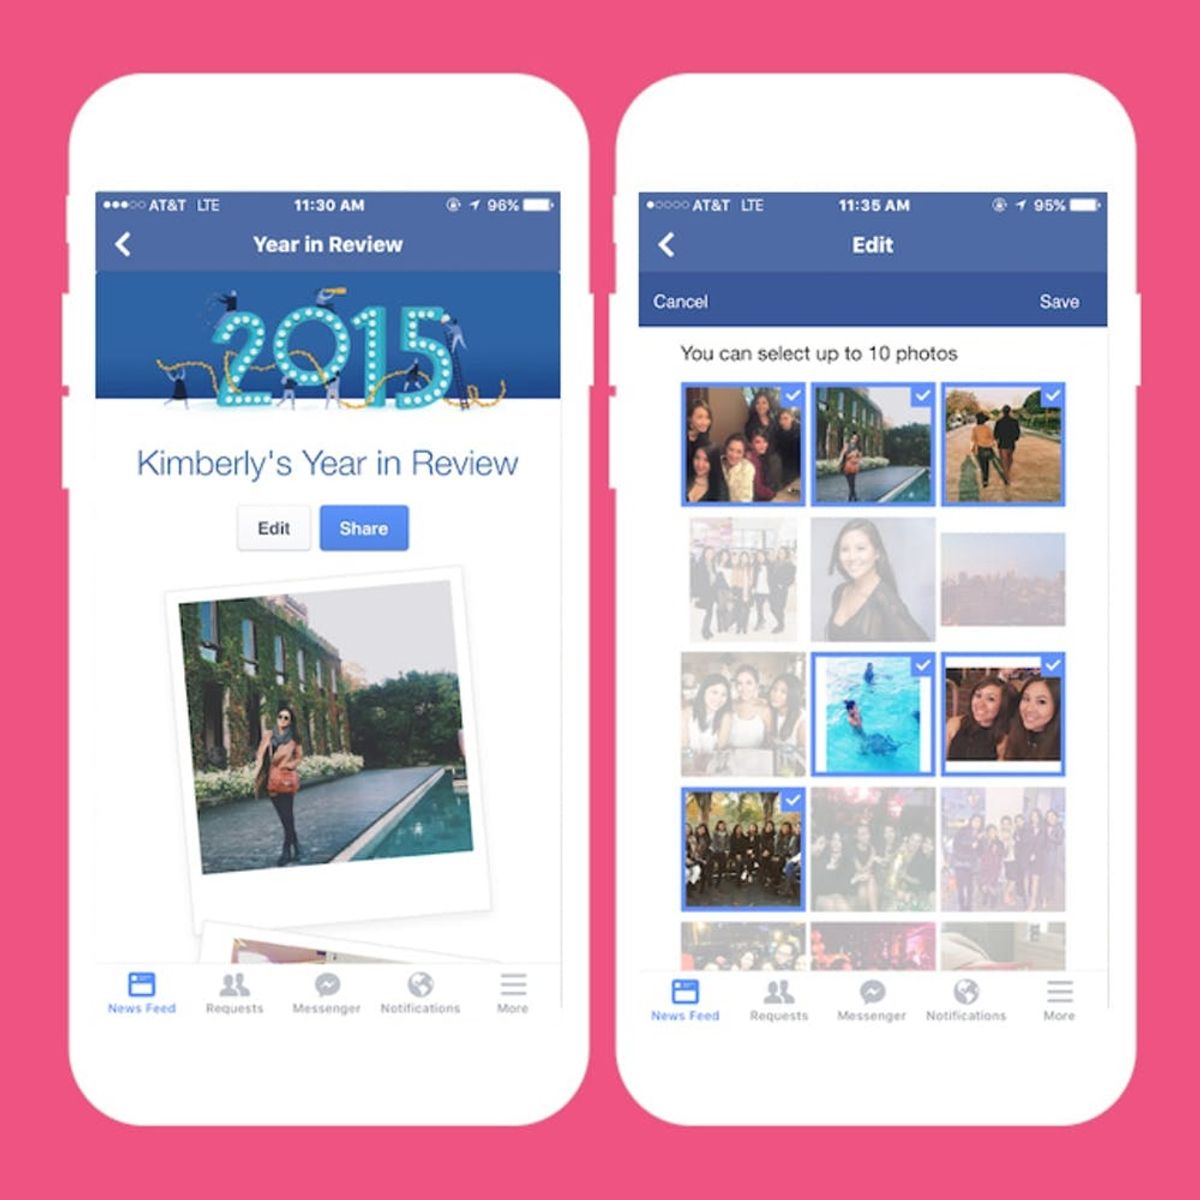 Facebook To Finally Let You Remove ‘Year in Review’ Memories You Don’t Want to Relive